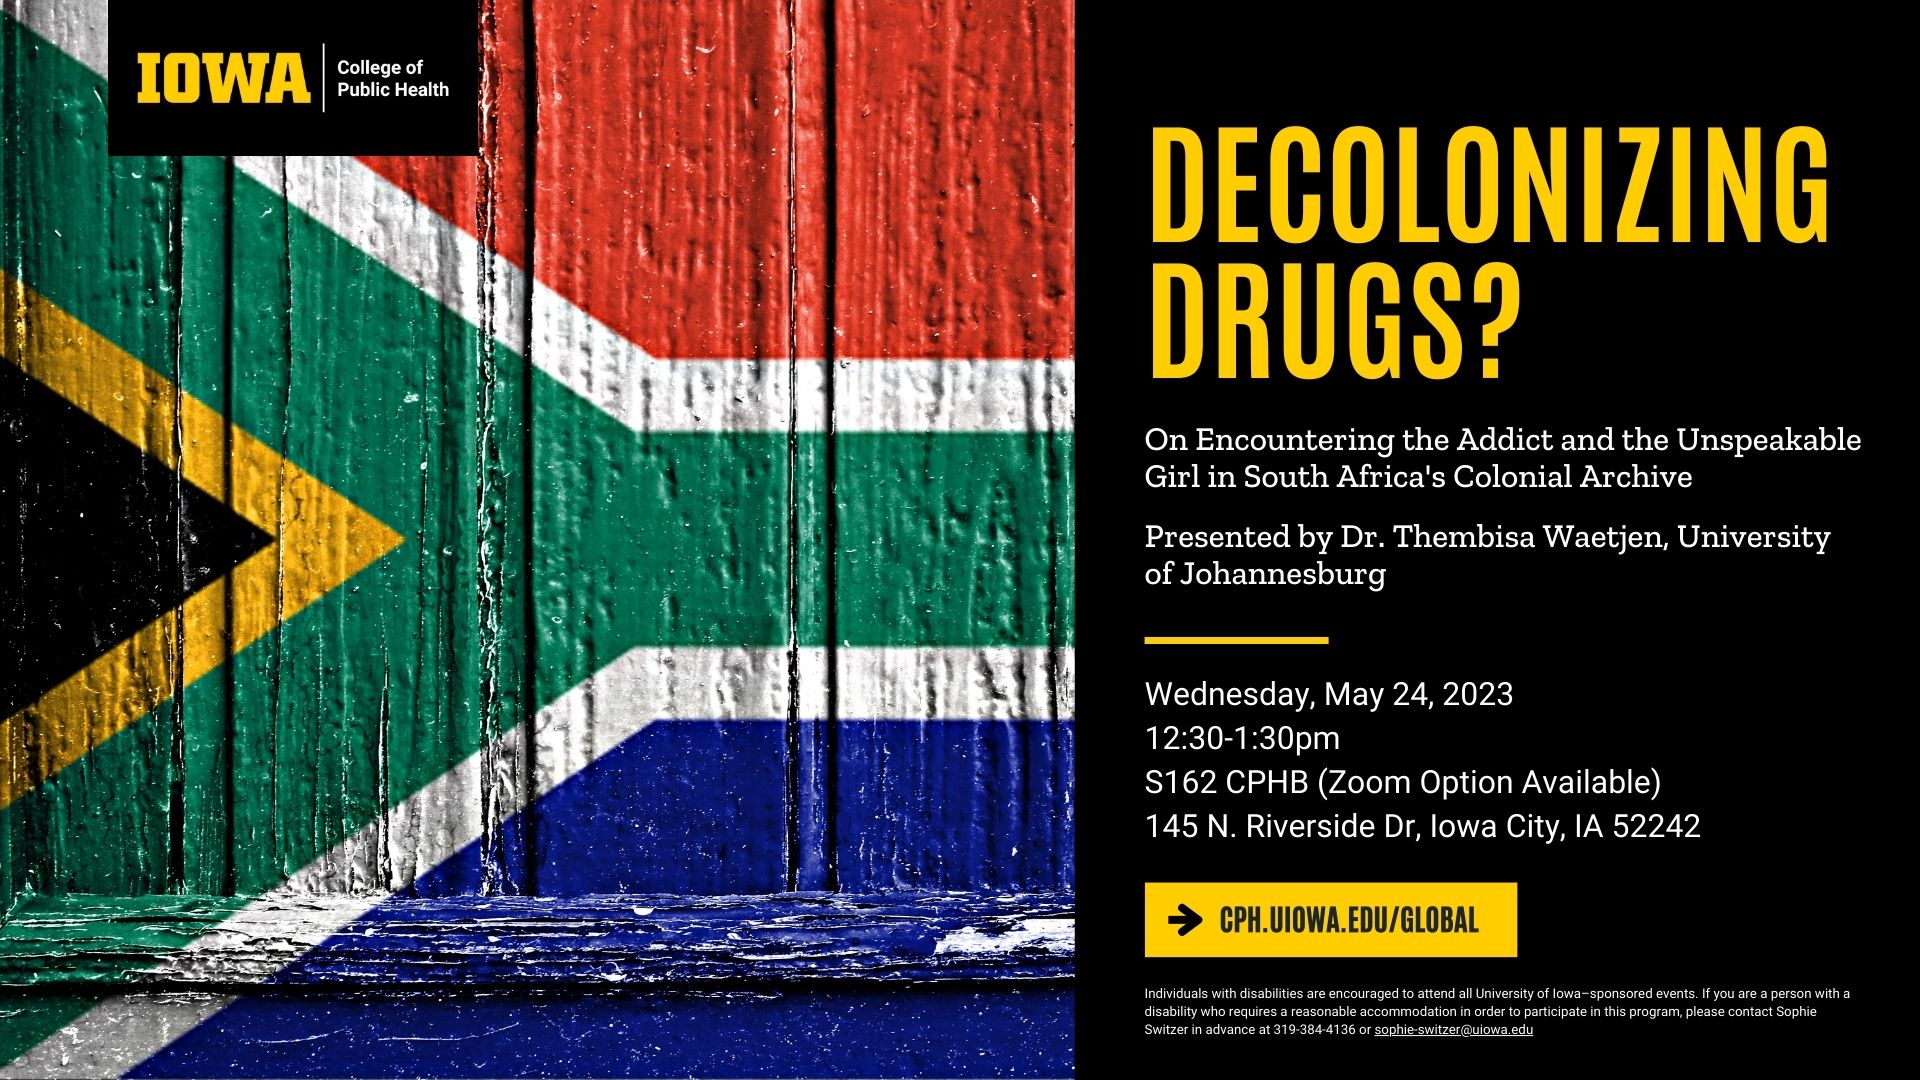 Decolonising Drugs / Histories? On Encountering the Addict and the Unspeakable Girl in South Africa’s Colonial Archive promotional image